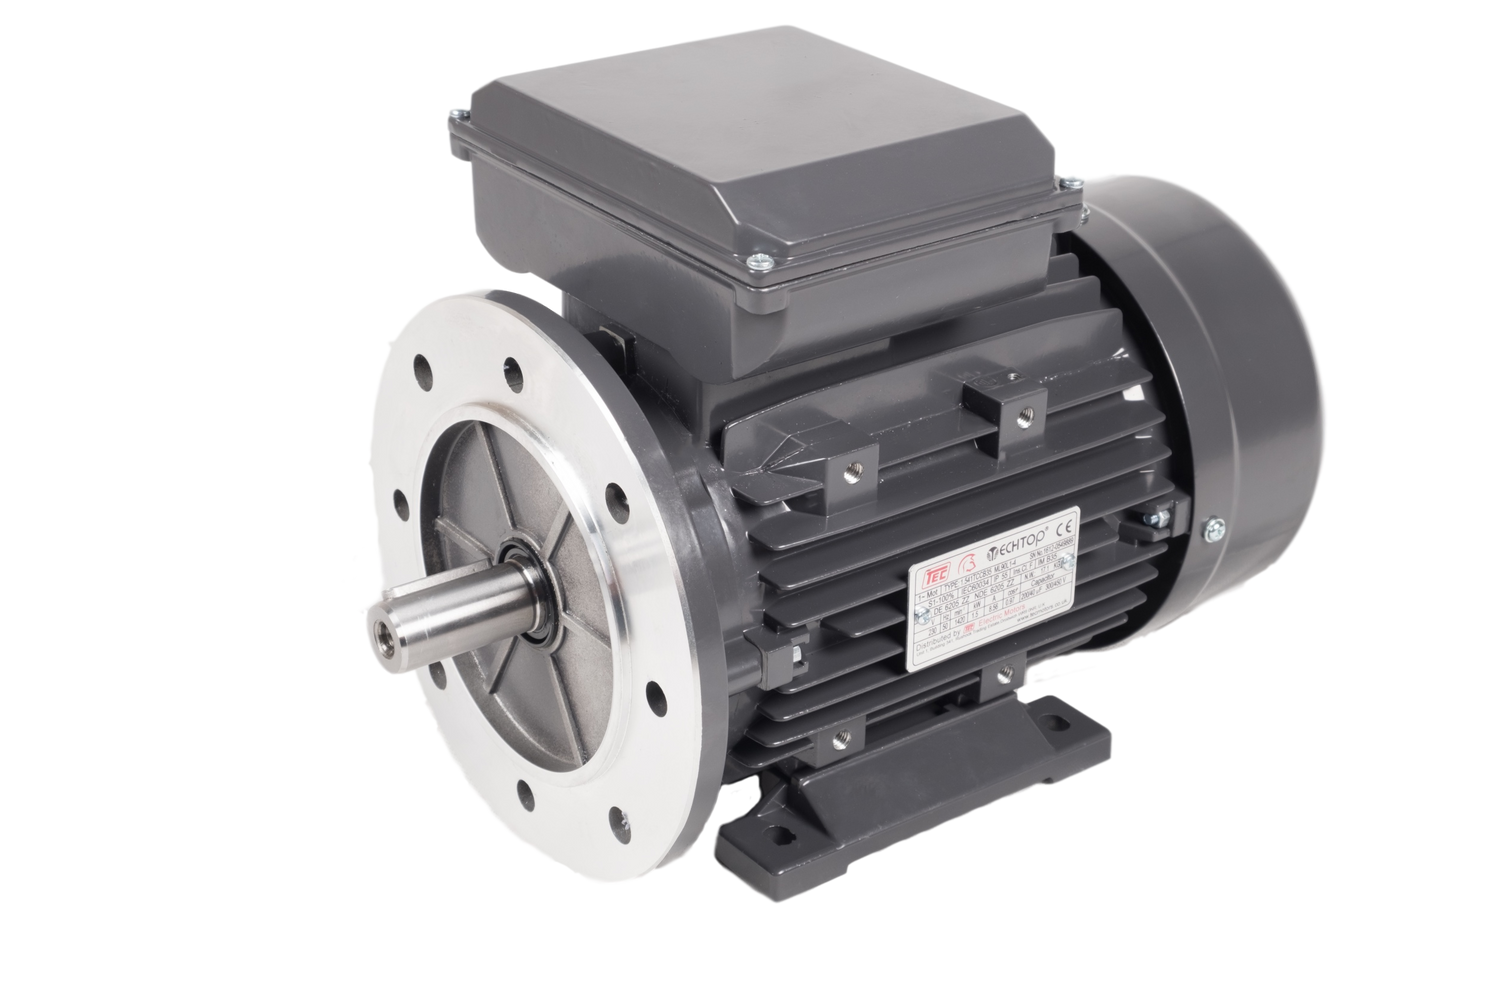 TEC-Three-Phase-Aluminium-Electric-Motor-0.75kw-2-Pole-Foot-and-Flange-Mounted-B35-IE2